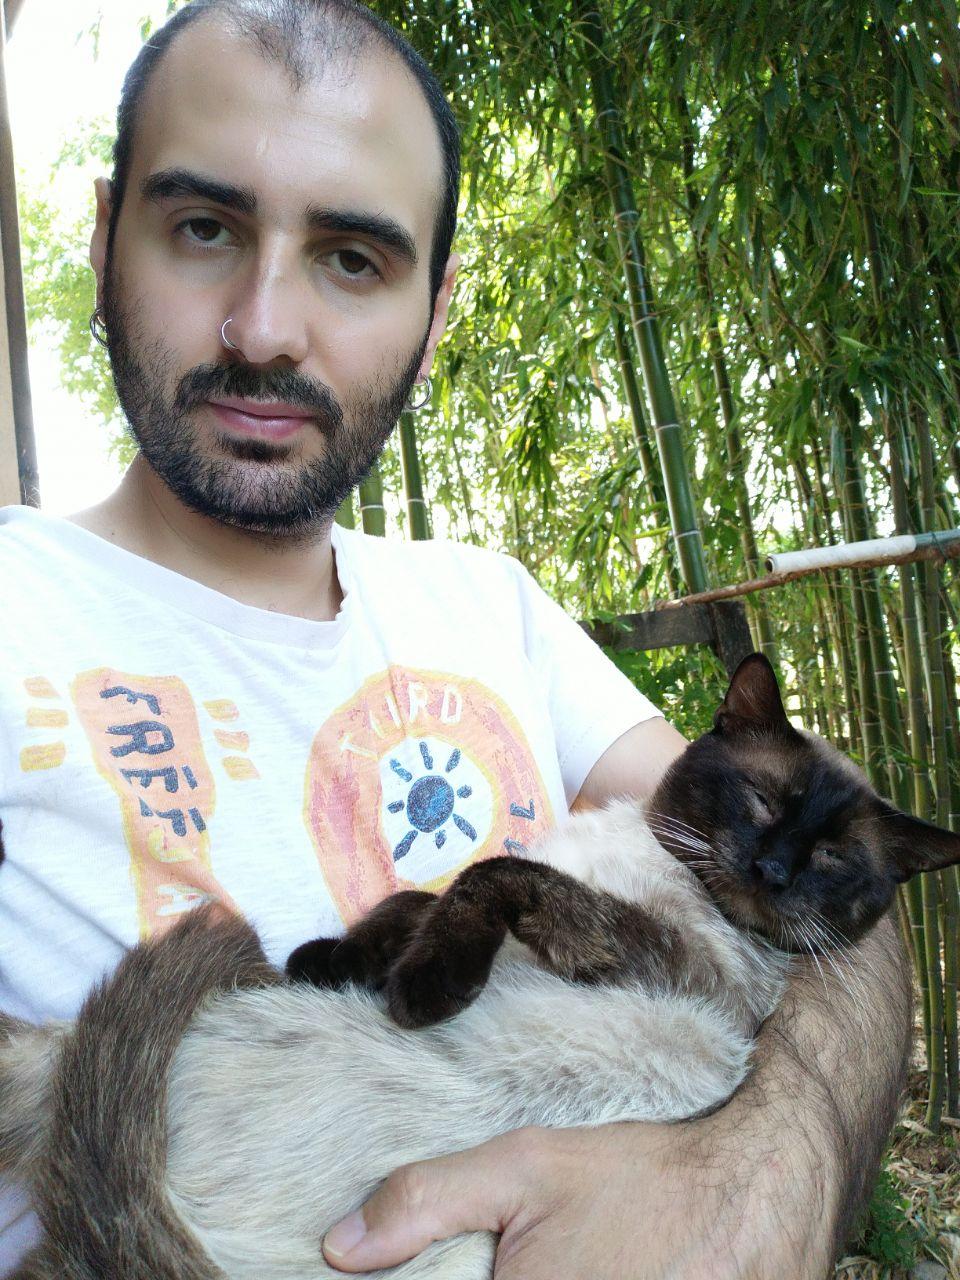 Sergio holding a male cat, Coccolone, who is being extra cuddly and slightly chonky